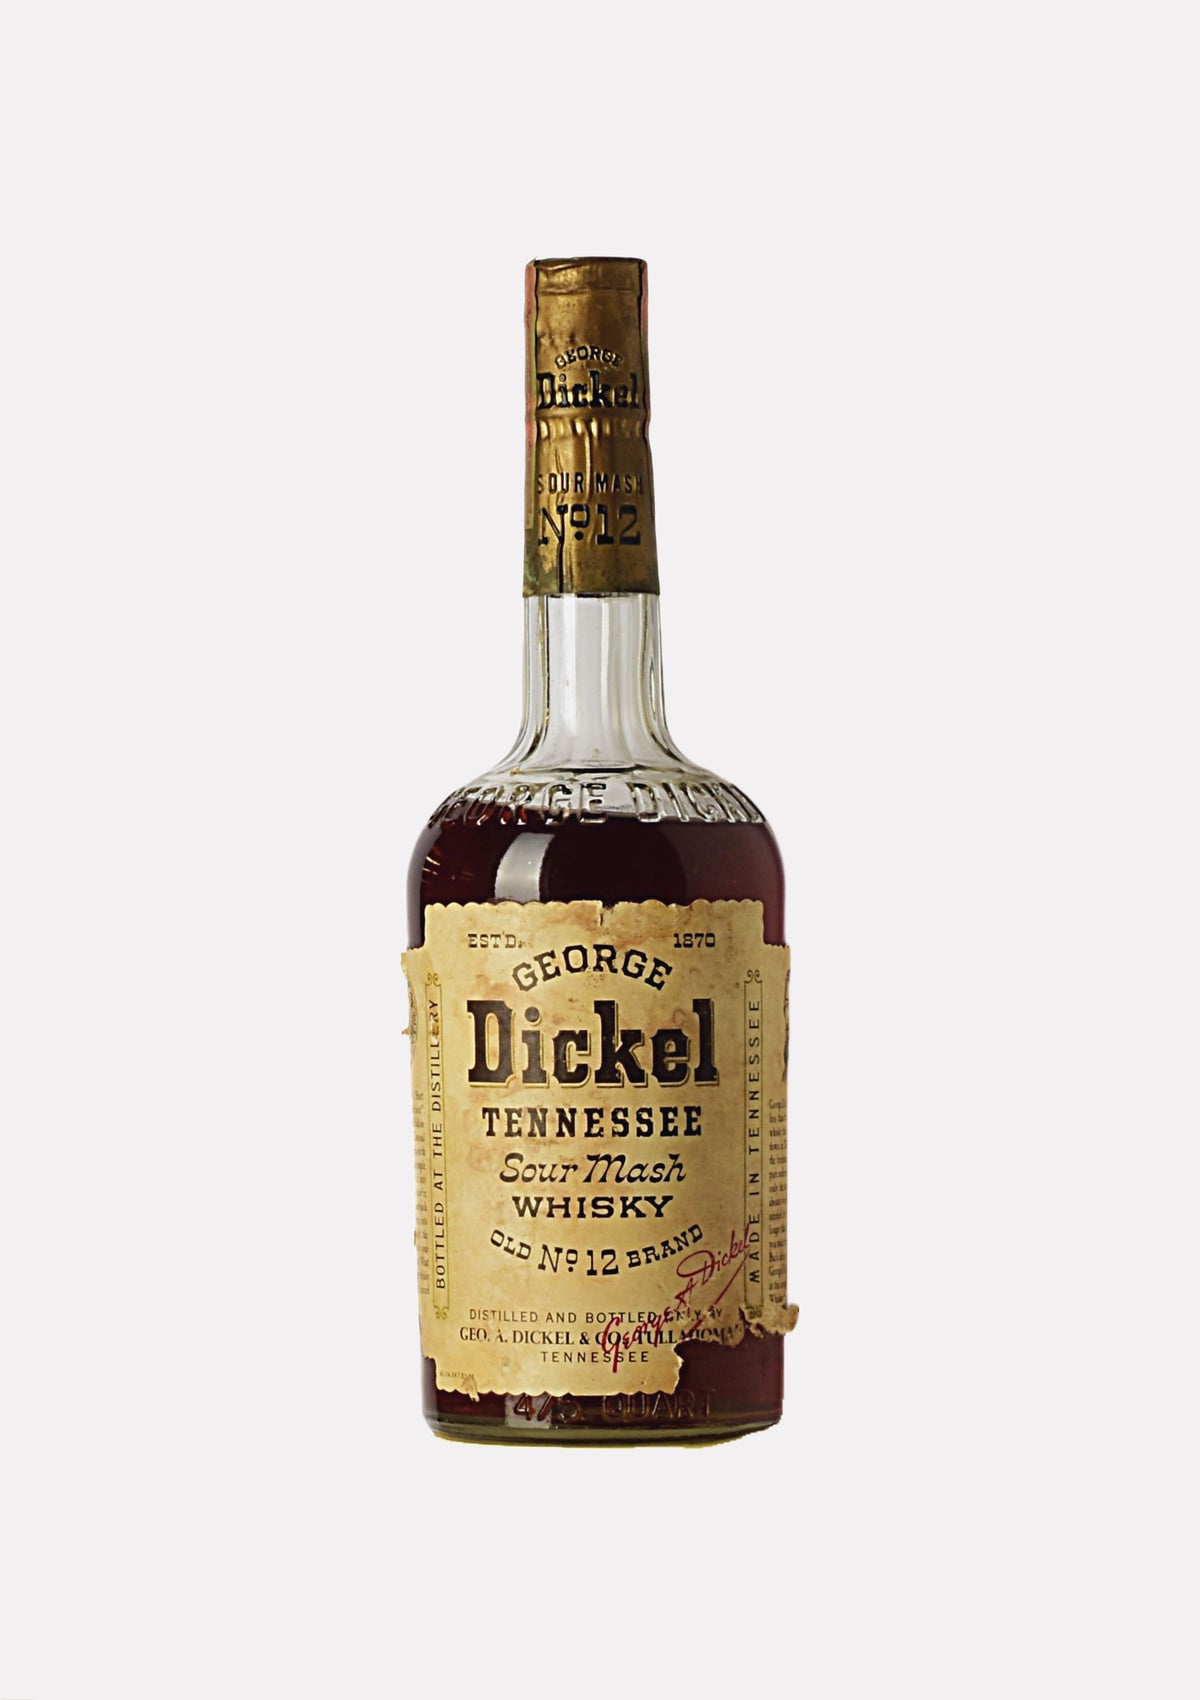 George Dickel Tennessee Sour Mash Whisky Old No. 12 Brand